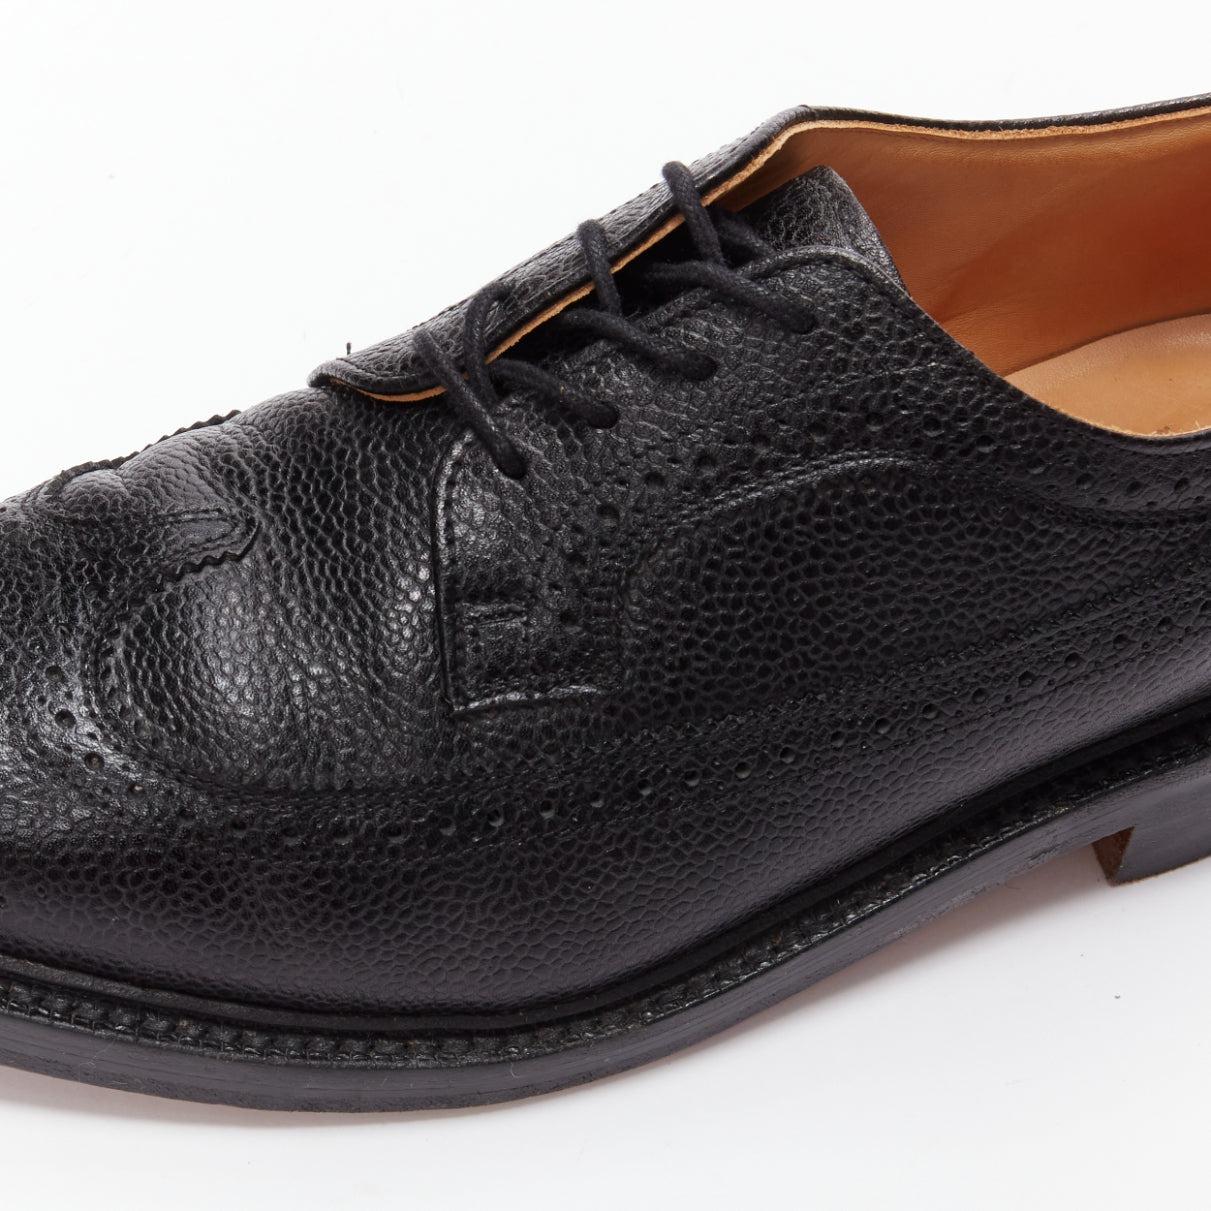 THOM BROWNE black grained leather perforated oxford brogue shoes EU42.5 For Sale 2